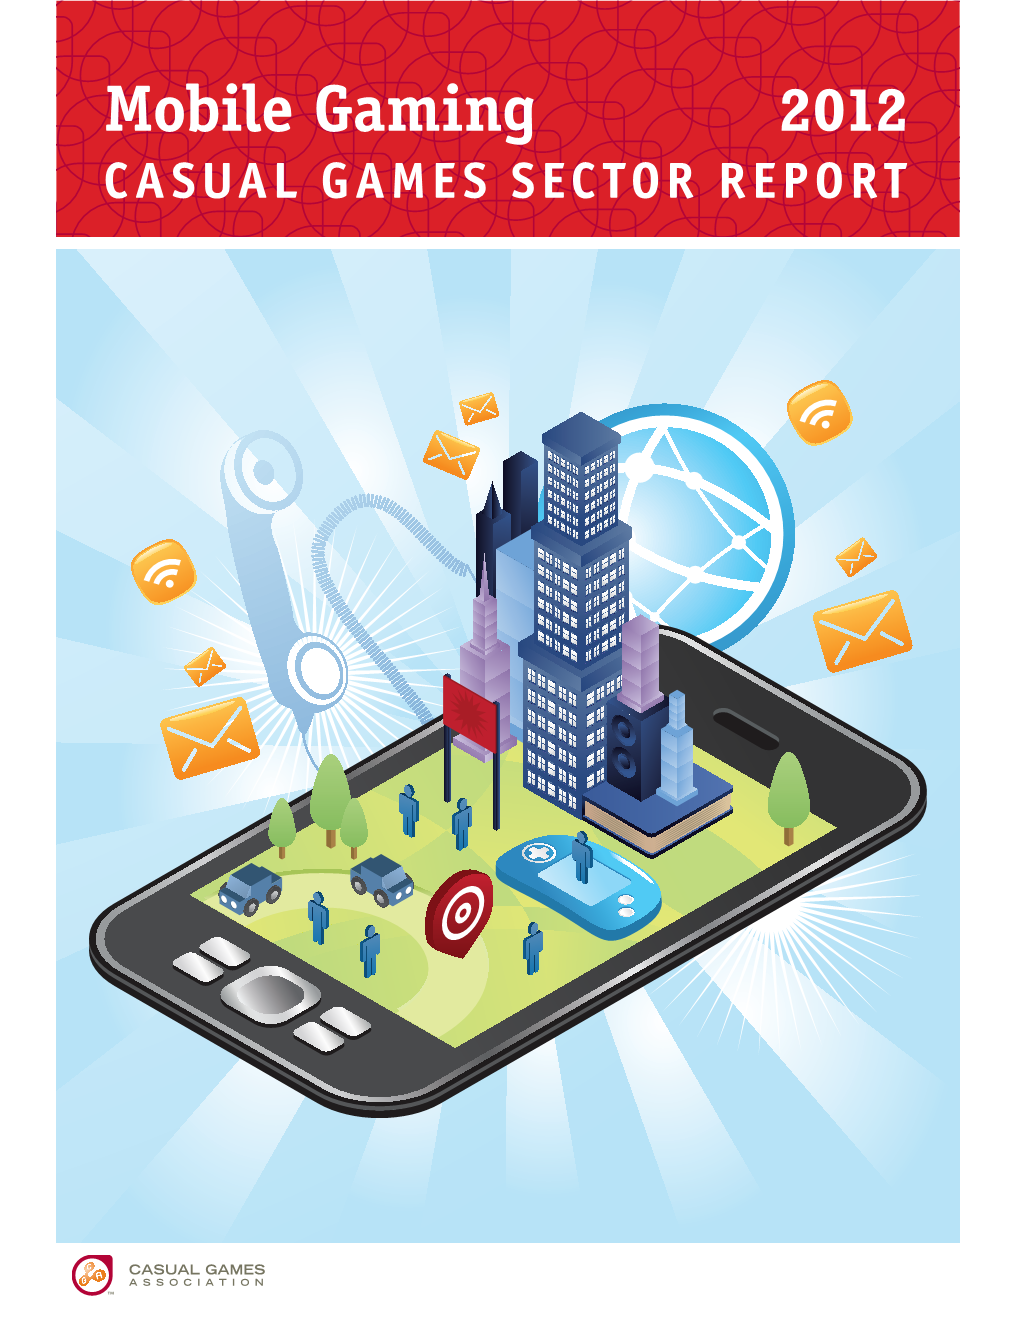 Mobile Gaming 2012 CASUAL GAMES SECTOR REPORT What Are Mobile Games?